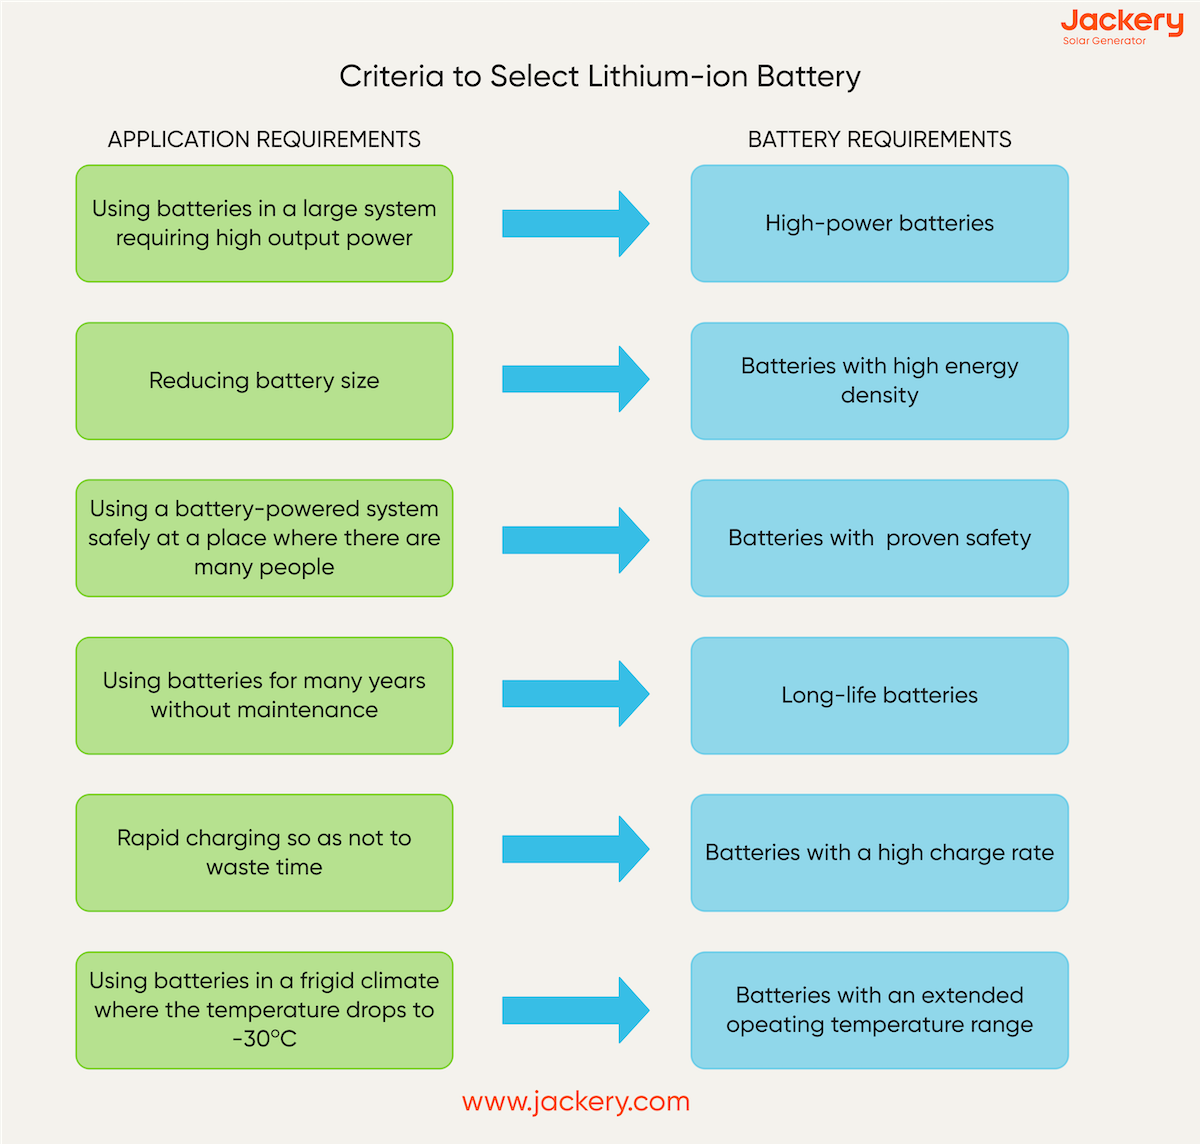 criteria to select lithium-ion battery